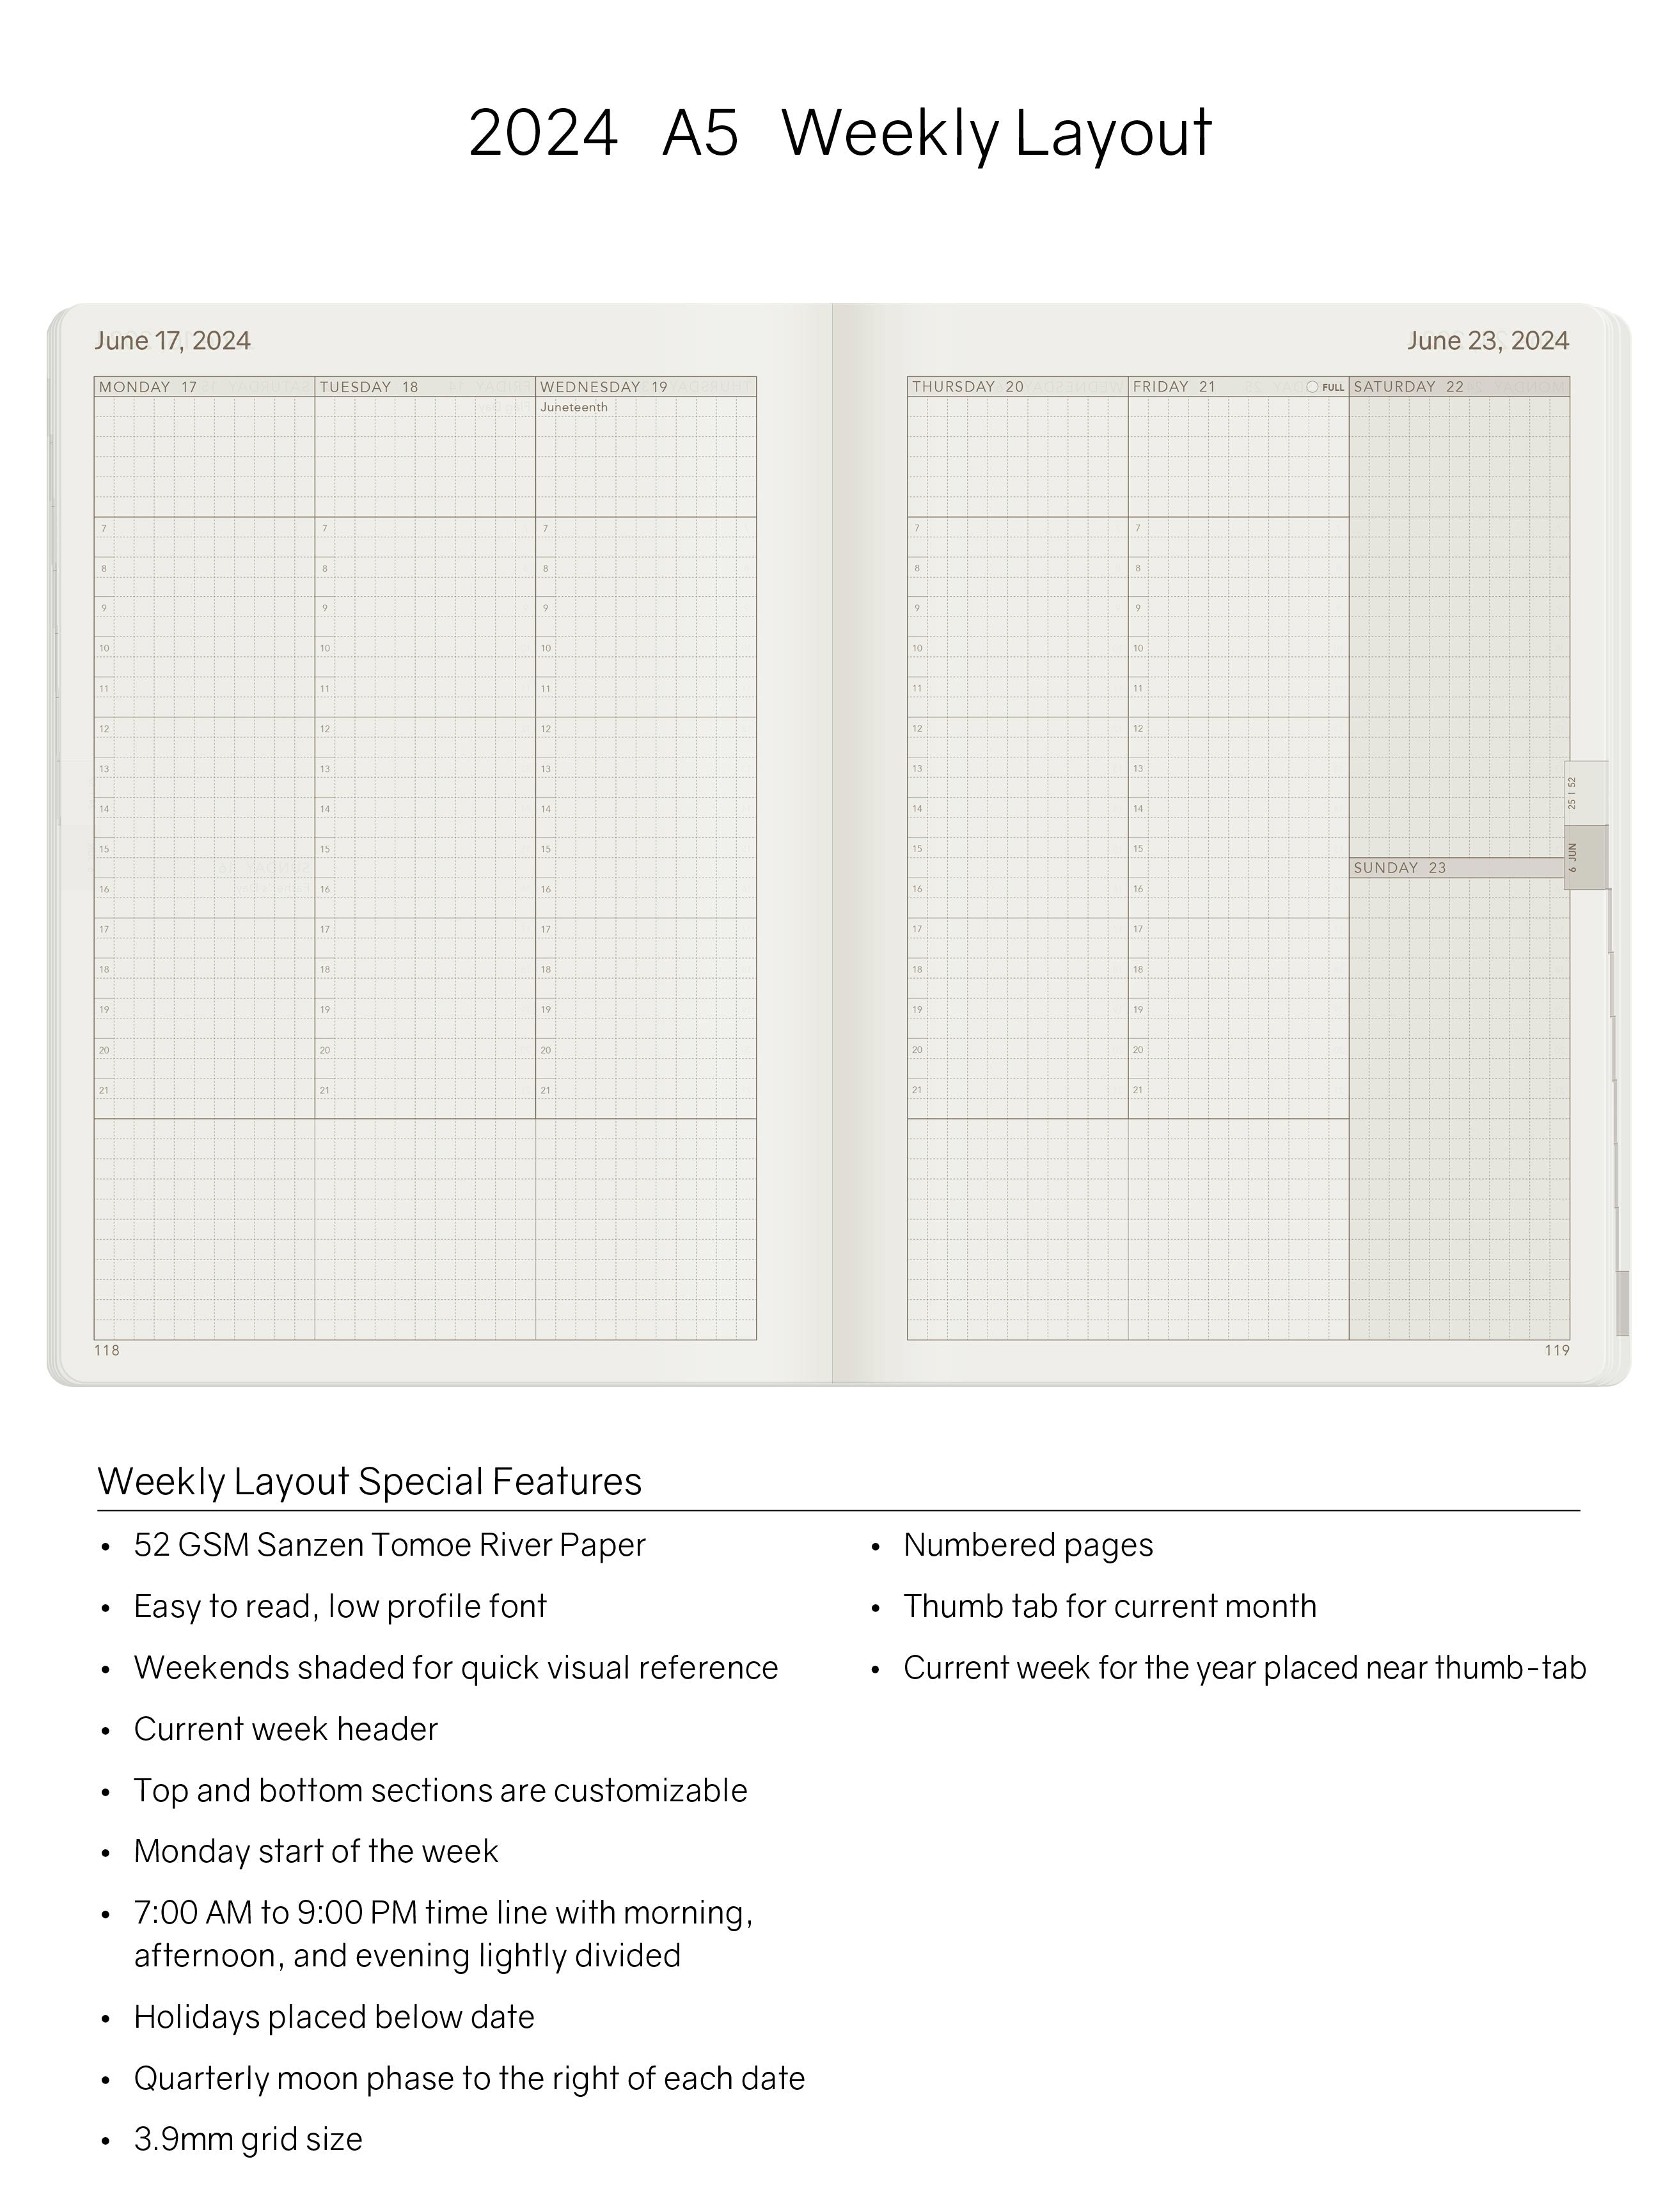 2024 A5 Weekly Planner (Stacked Weekends) -Alpine Lake (Blue) 52gsm Tomoe River Paper